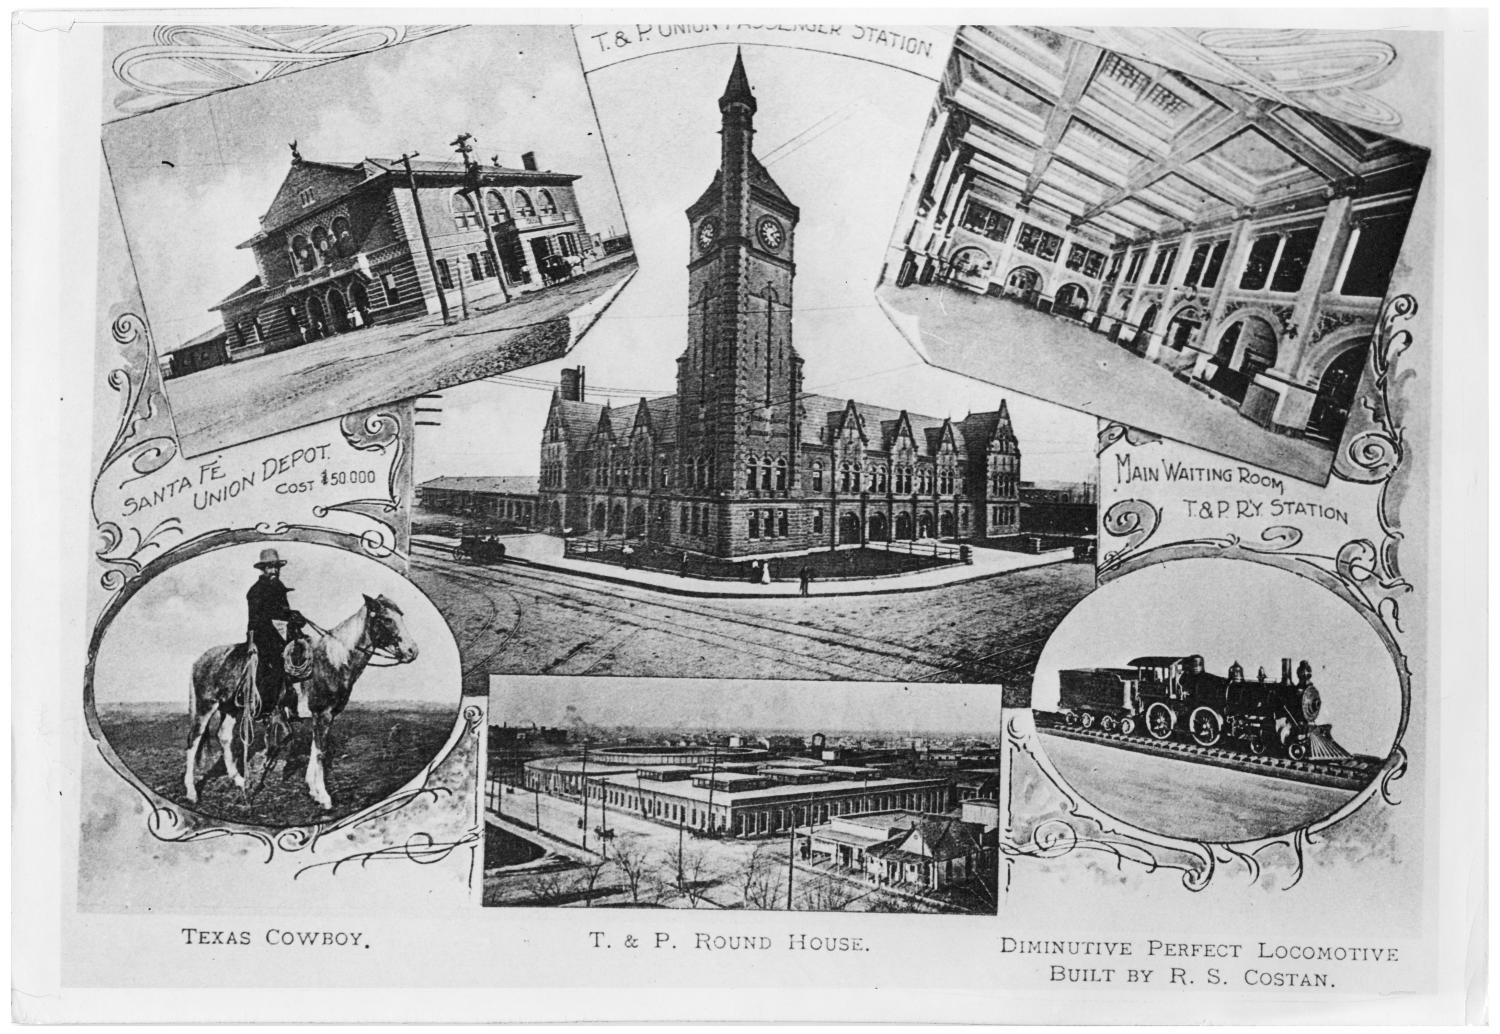 Image of T&P Stations & Structures in Views of the Texas and Pacific Railway in Fort Worth, Texas